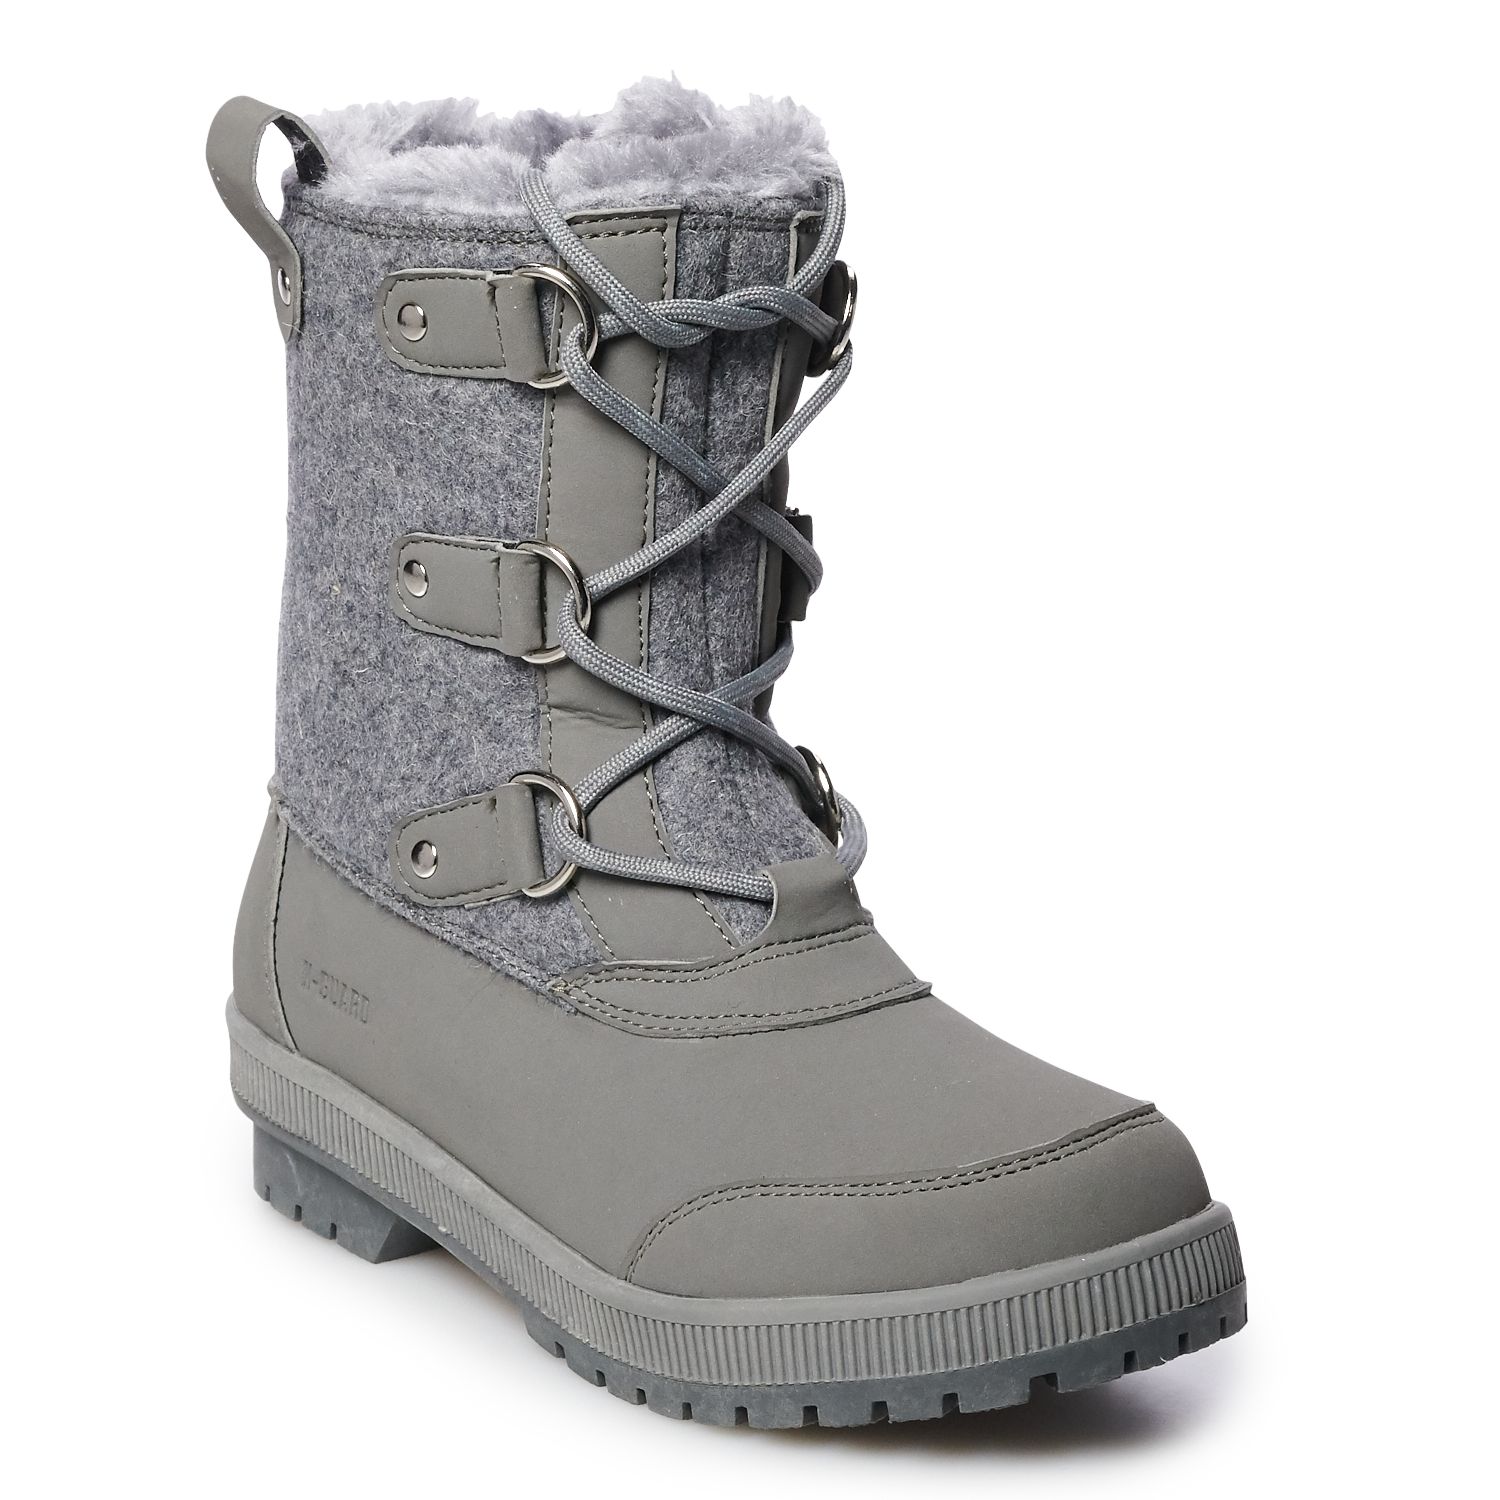 new womens winter boots